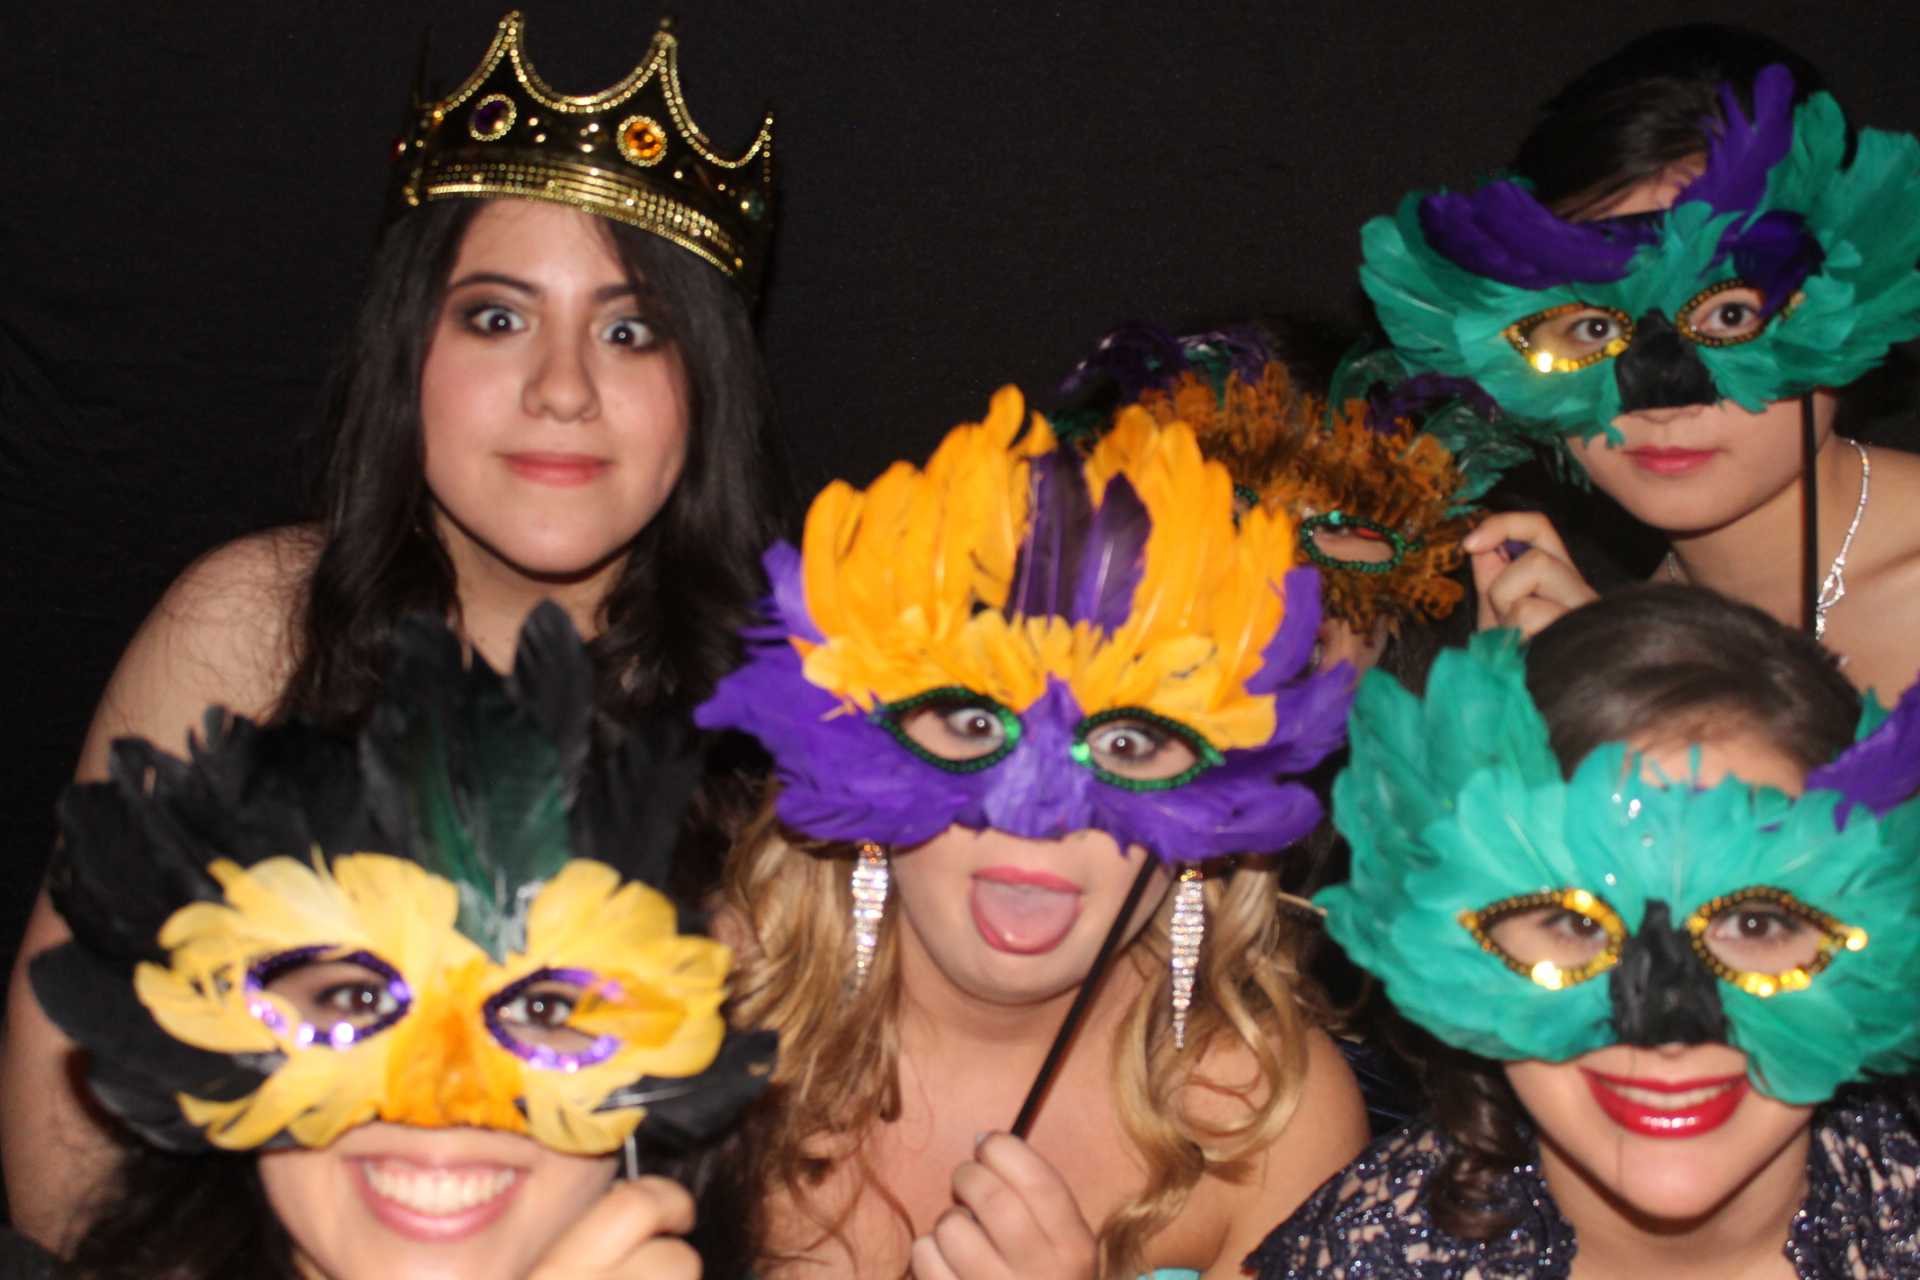 [Gallery] Prom: An Unforgettable Night - Photo Booth